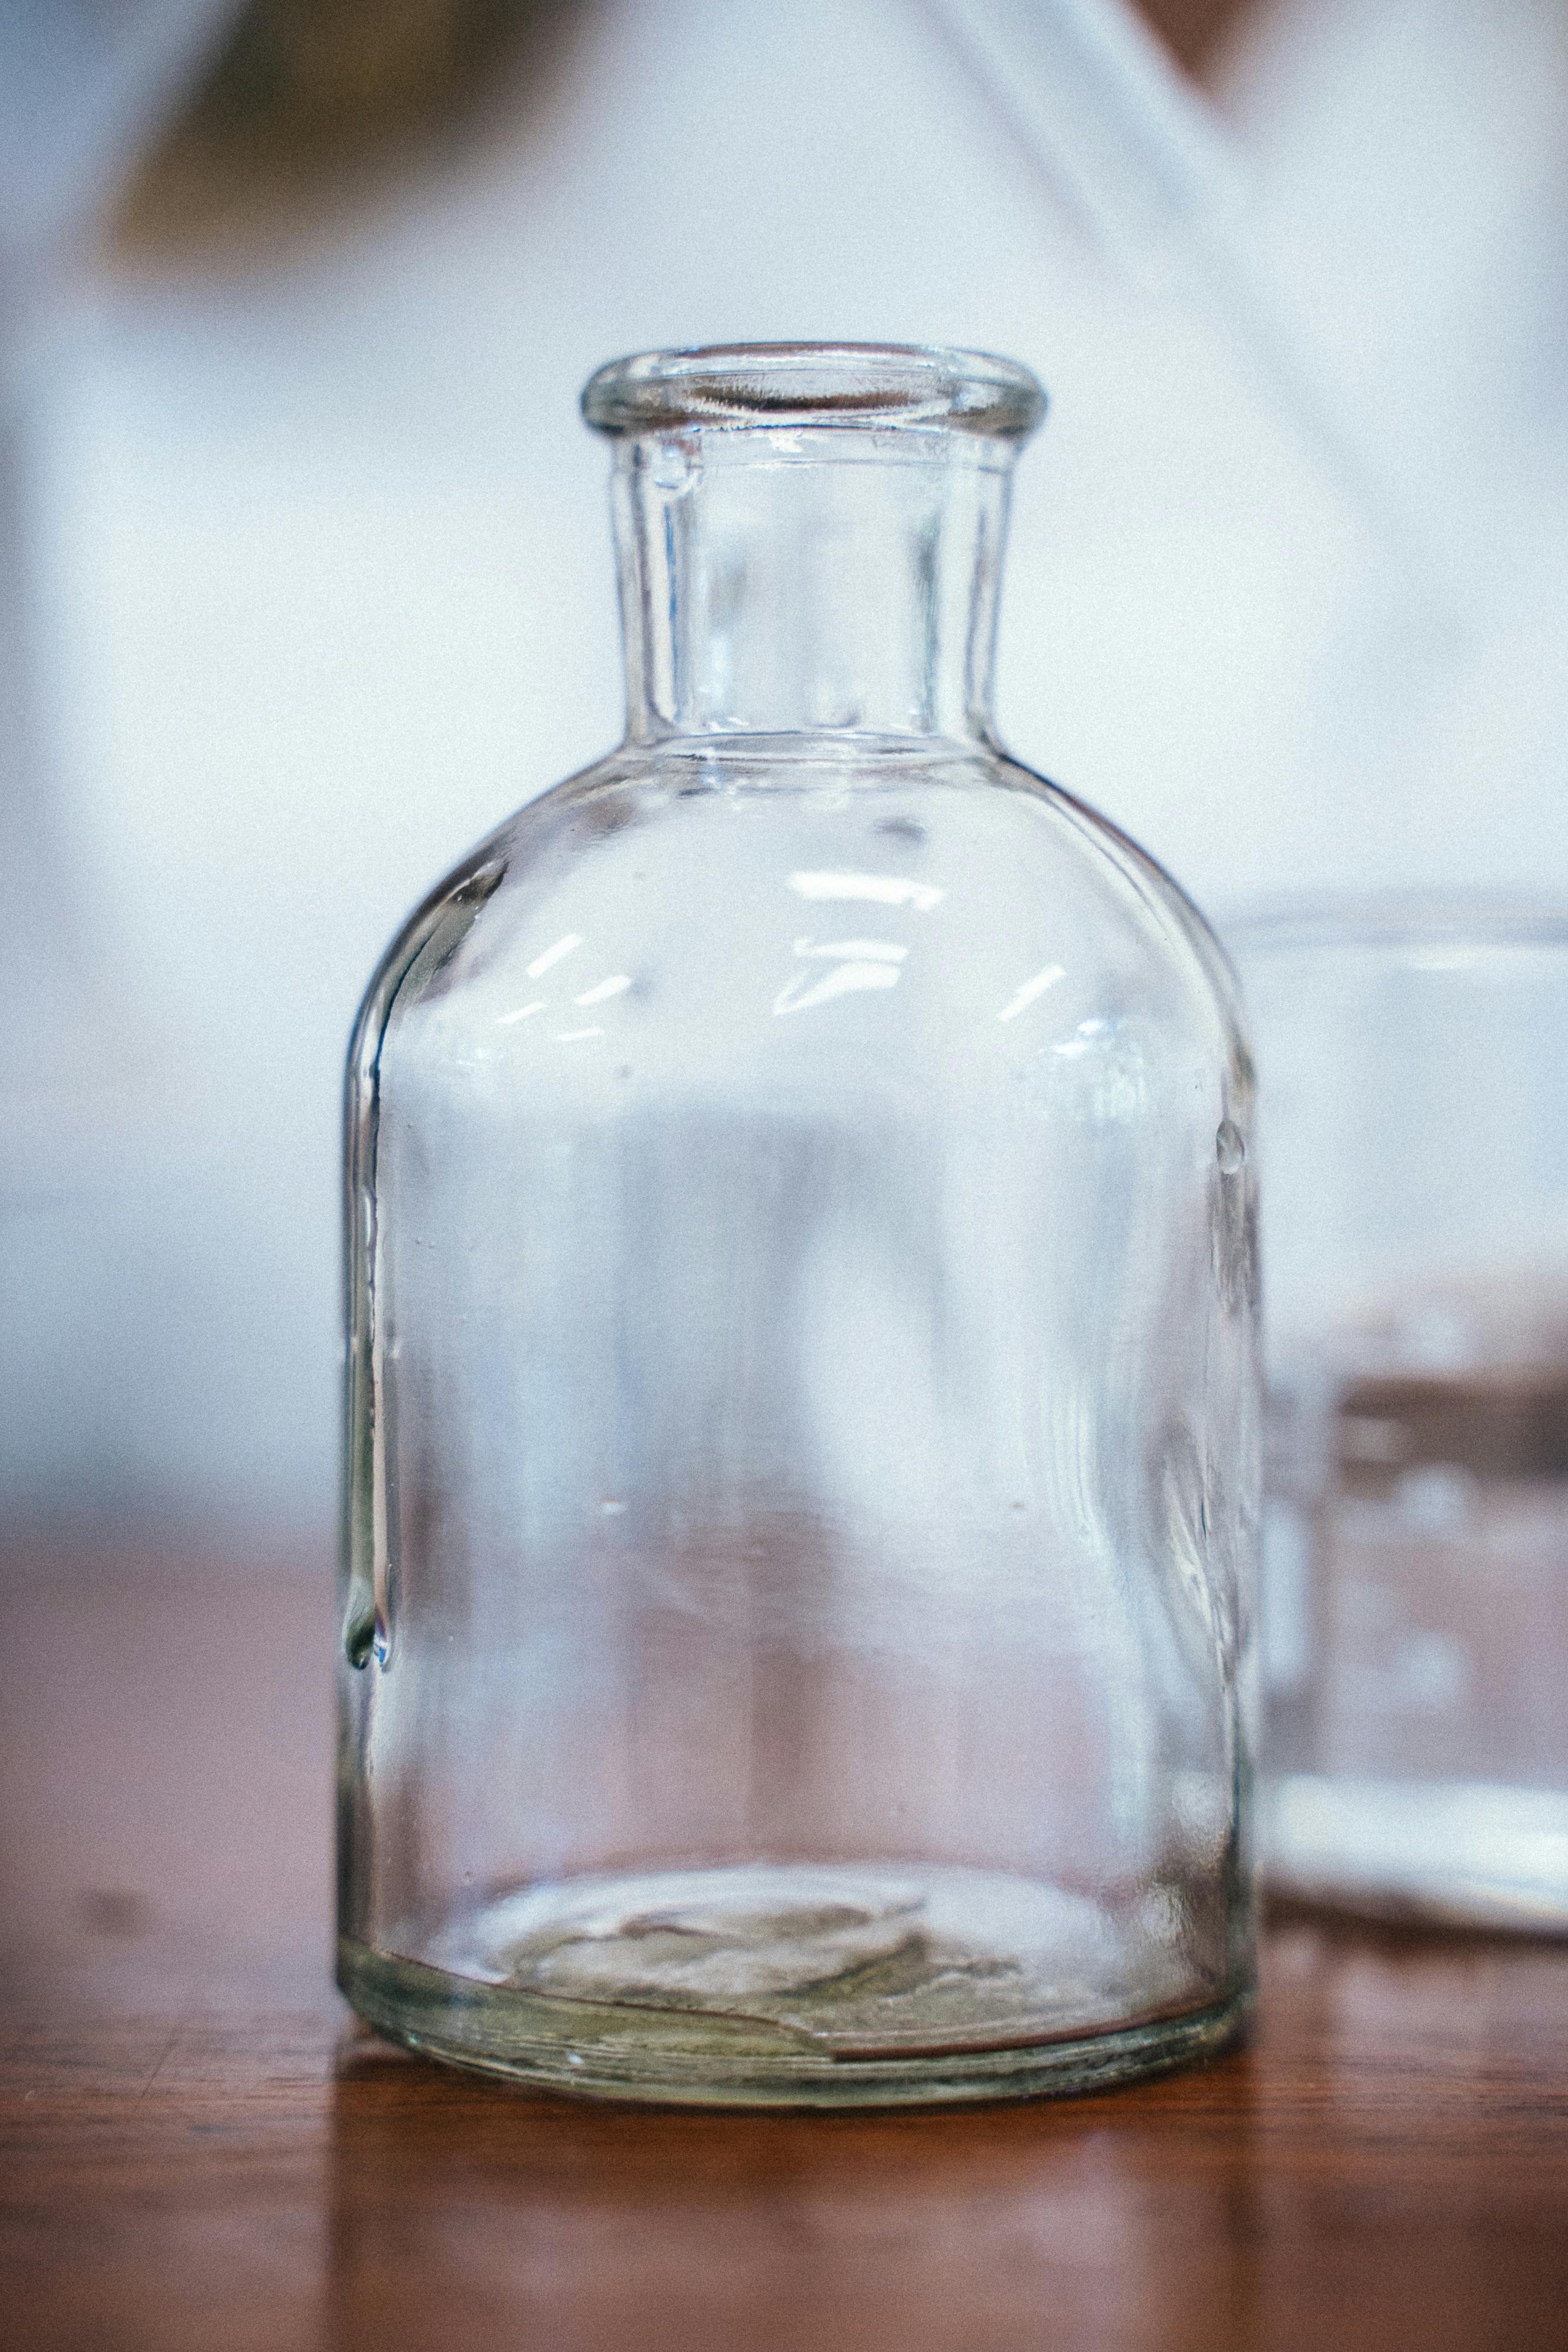 Free glass bottle stock photos. Download the best free glass